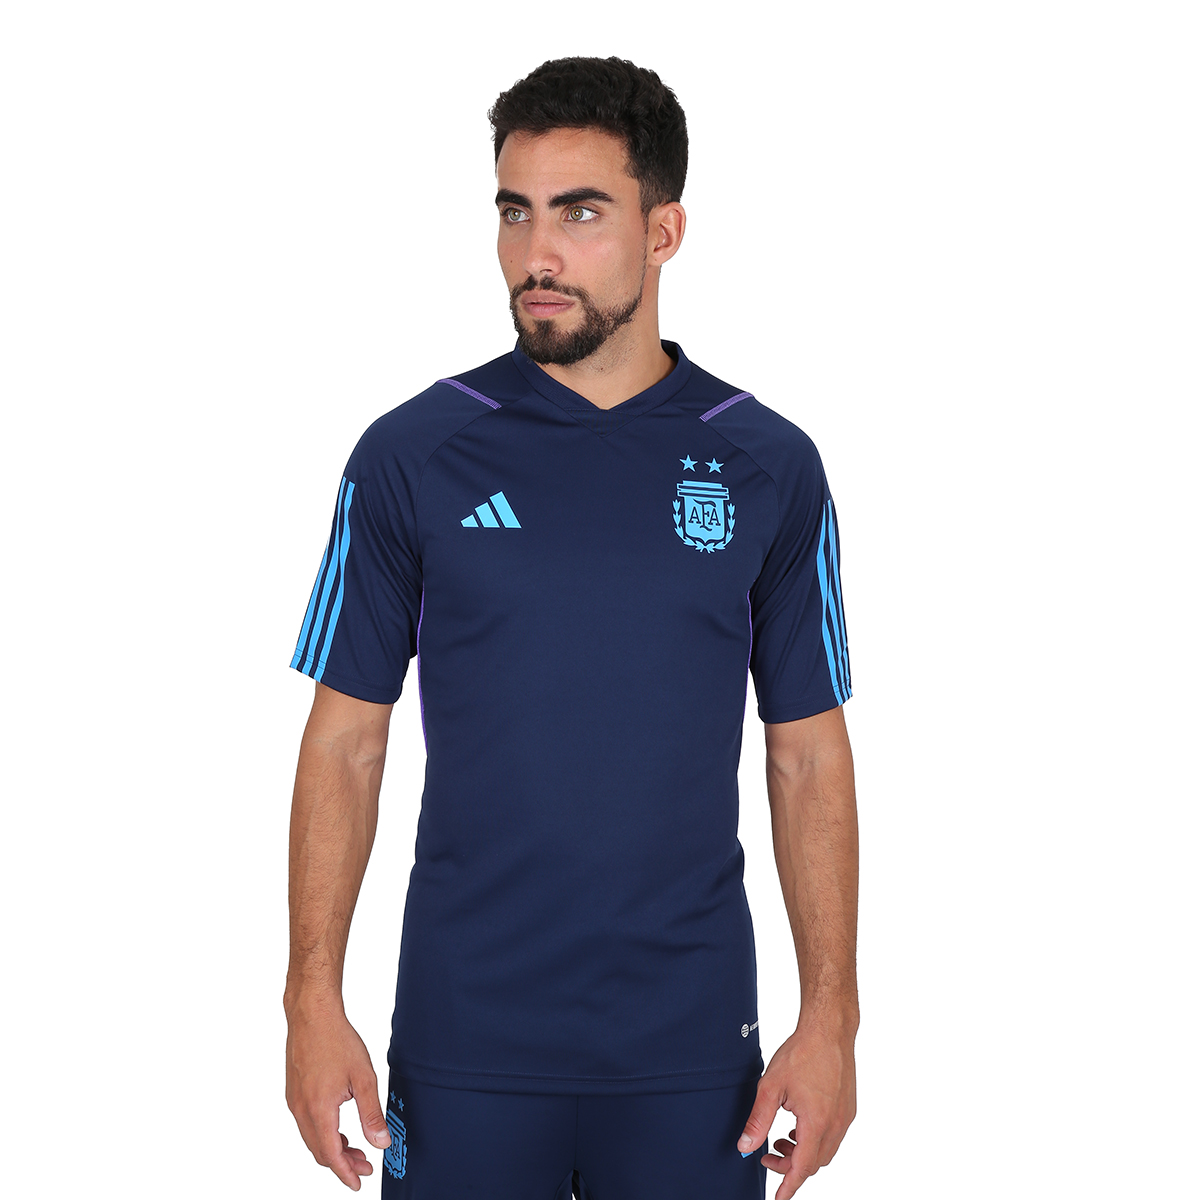 Remera Fútbol adidas Argentina Tr Hombre,  image number null